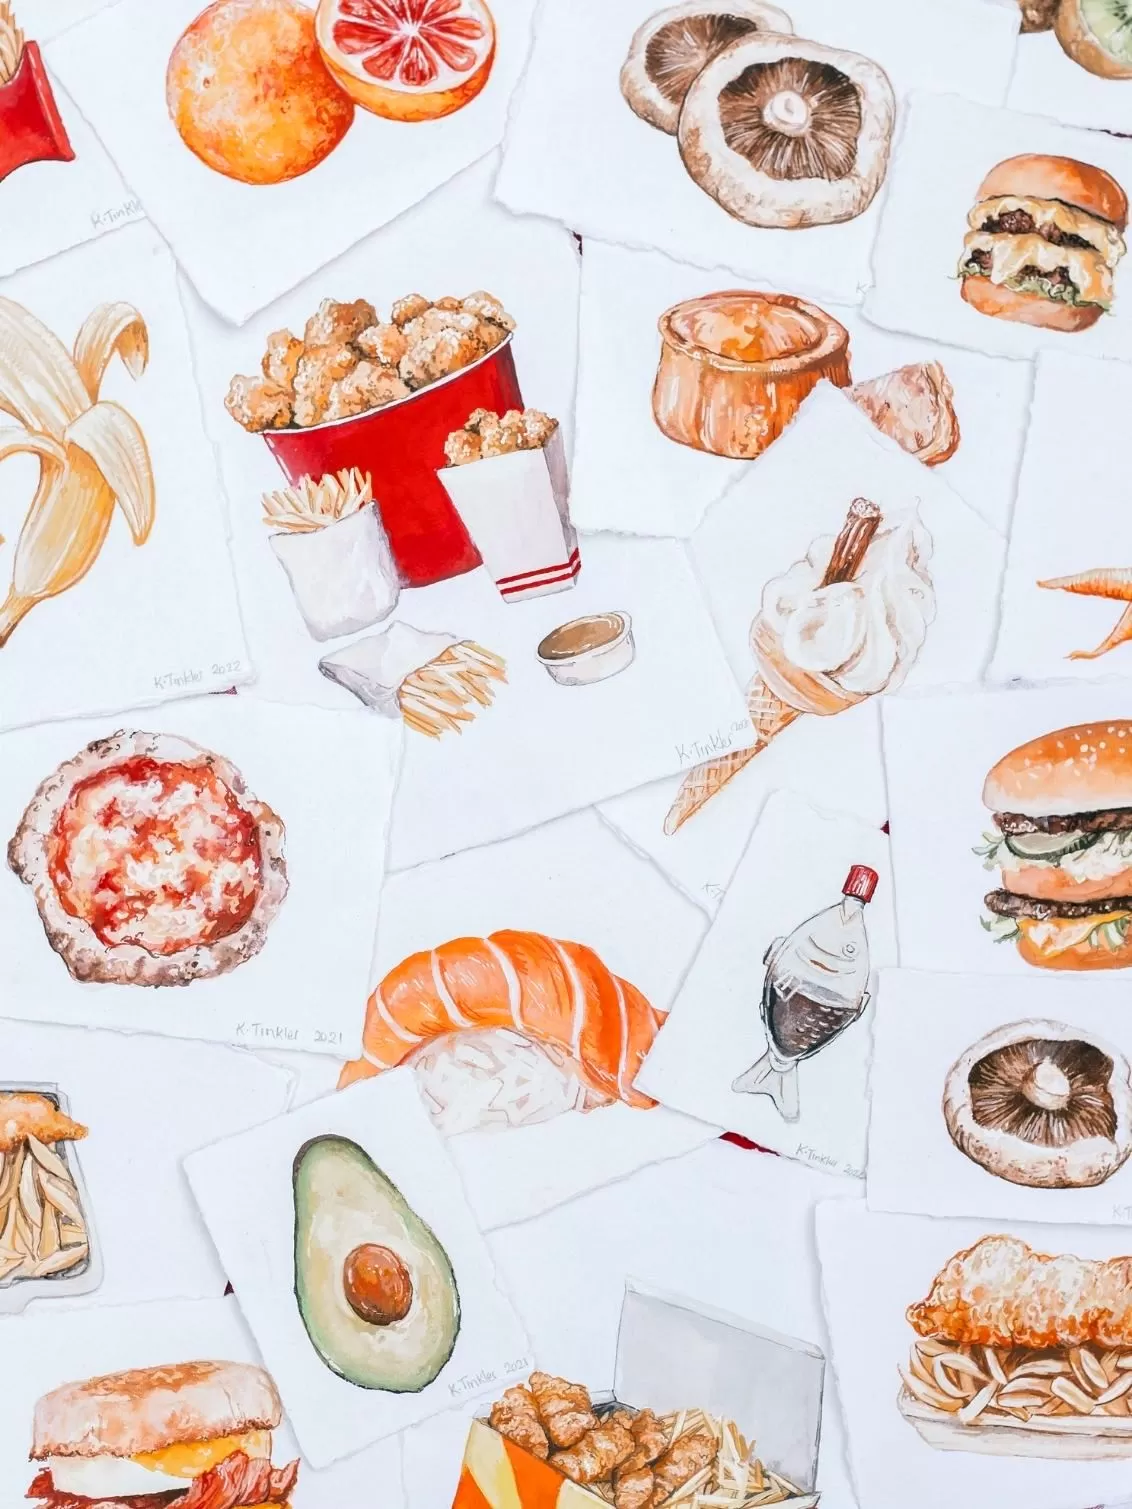 Katie Tinkler collection of food illustrations.